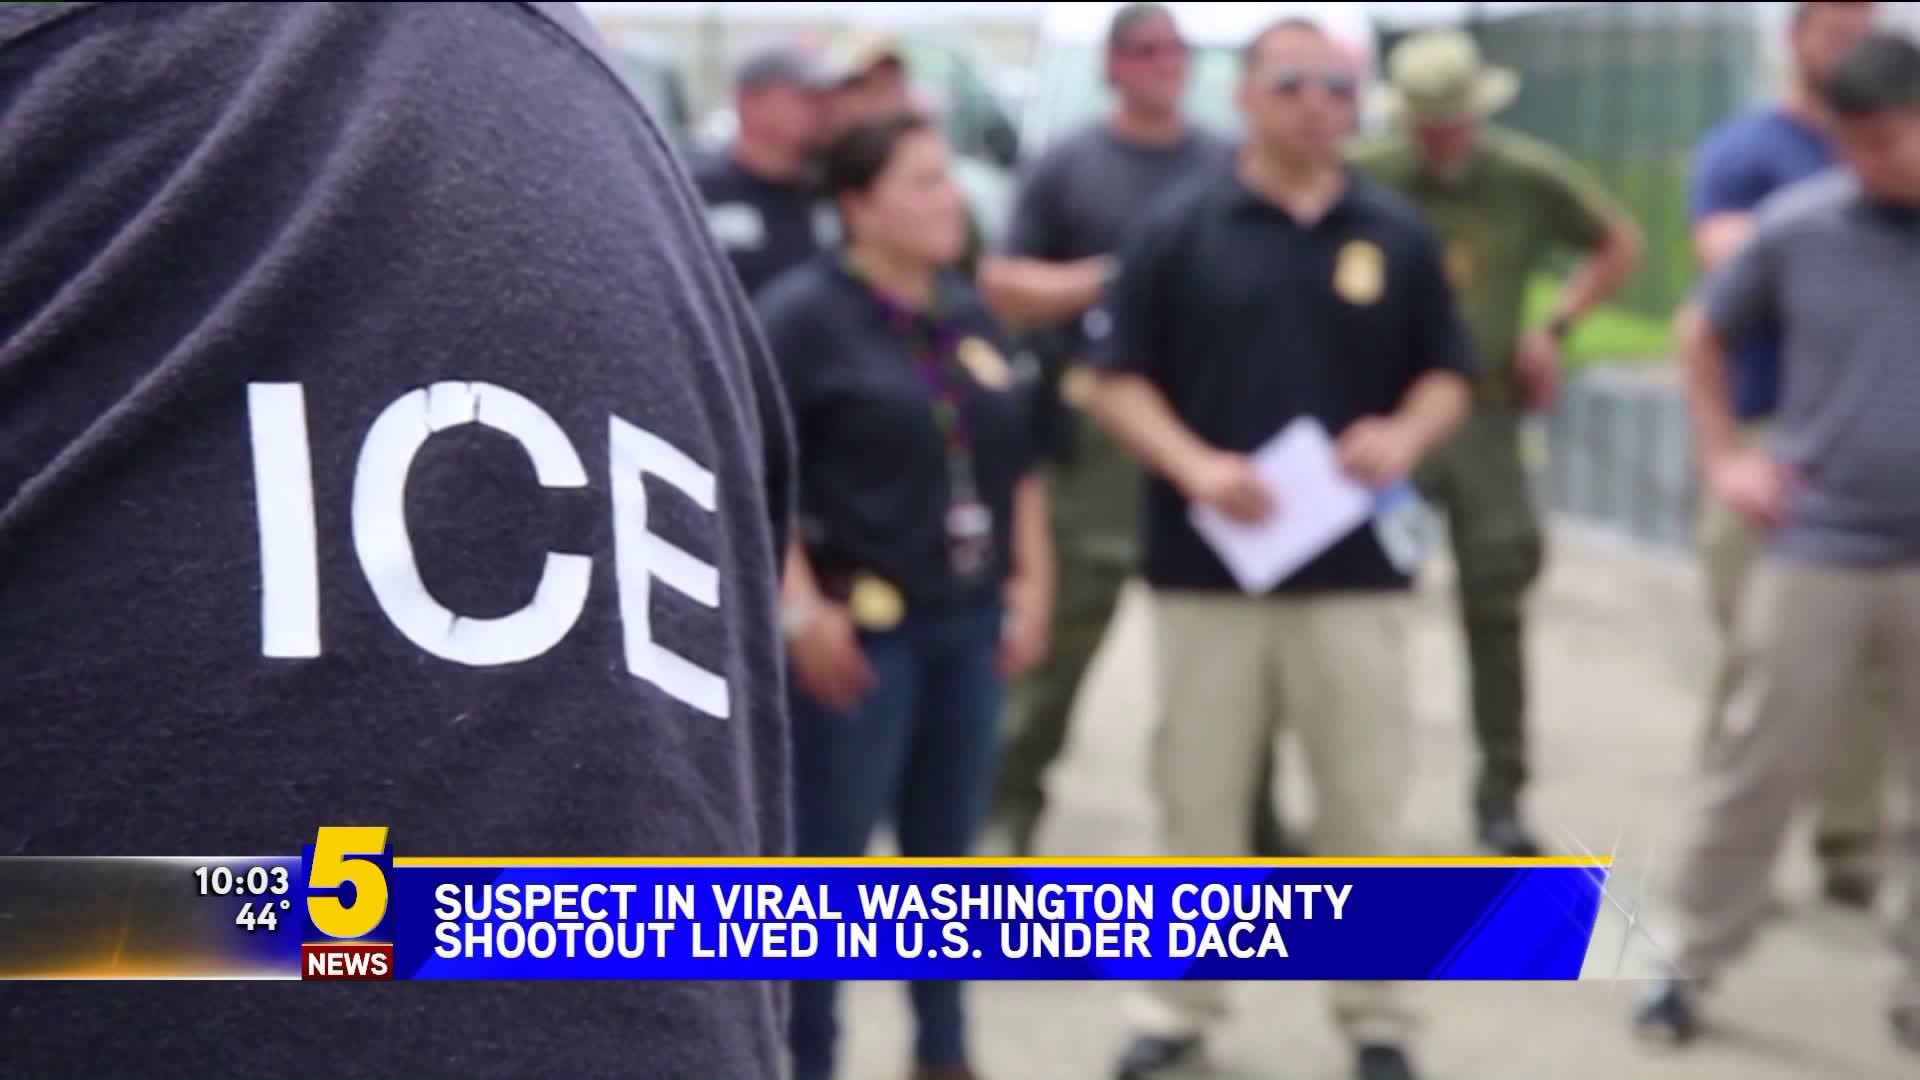 Suspect In Viral Wash Co. Shootout Lived IN U.S. Under Daca